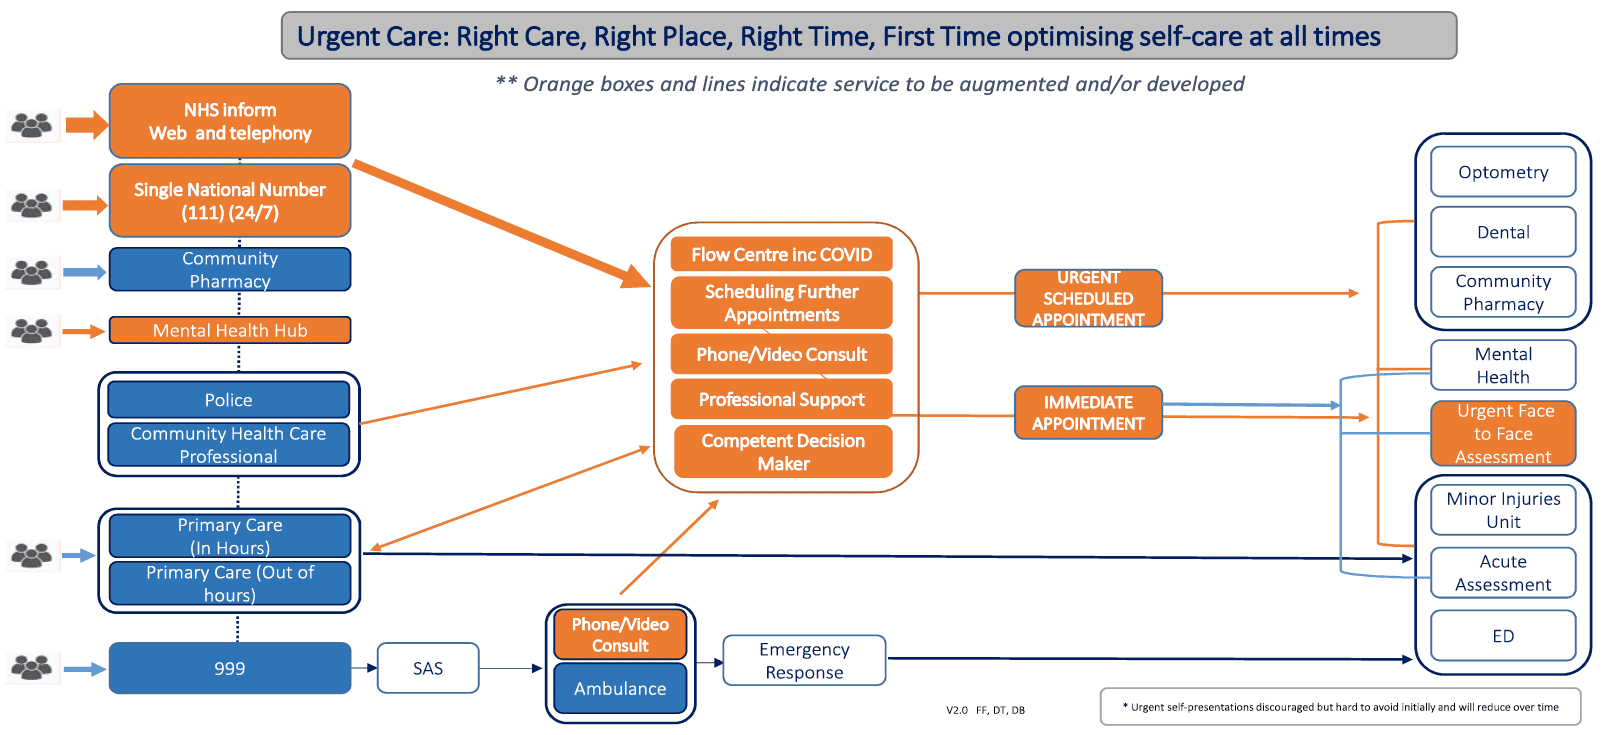 Image showing Urgent Care: Right Care, Right Place, Right Time optimising self-care at all times. Boxes and lines indicate service to be augmented and/or developed